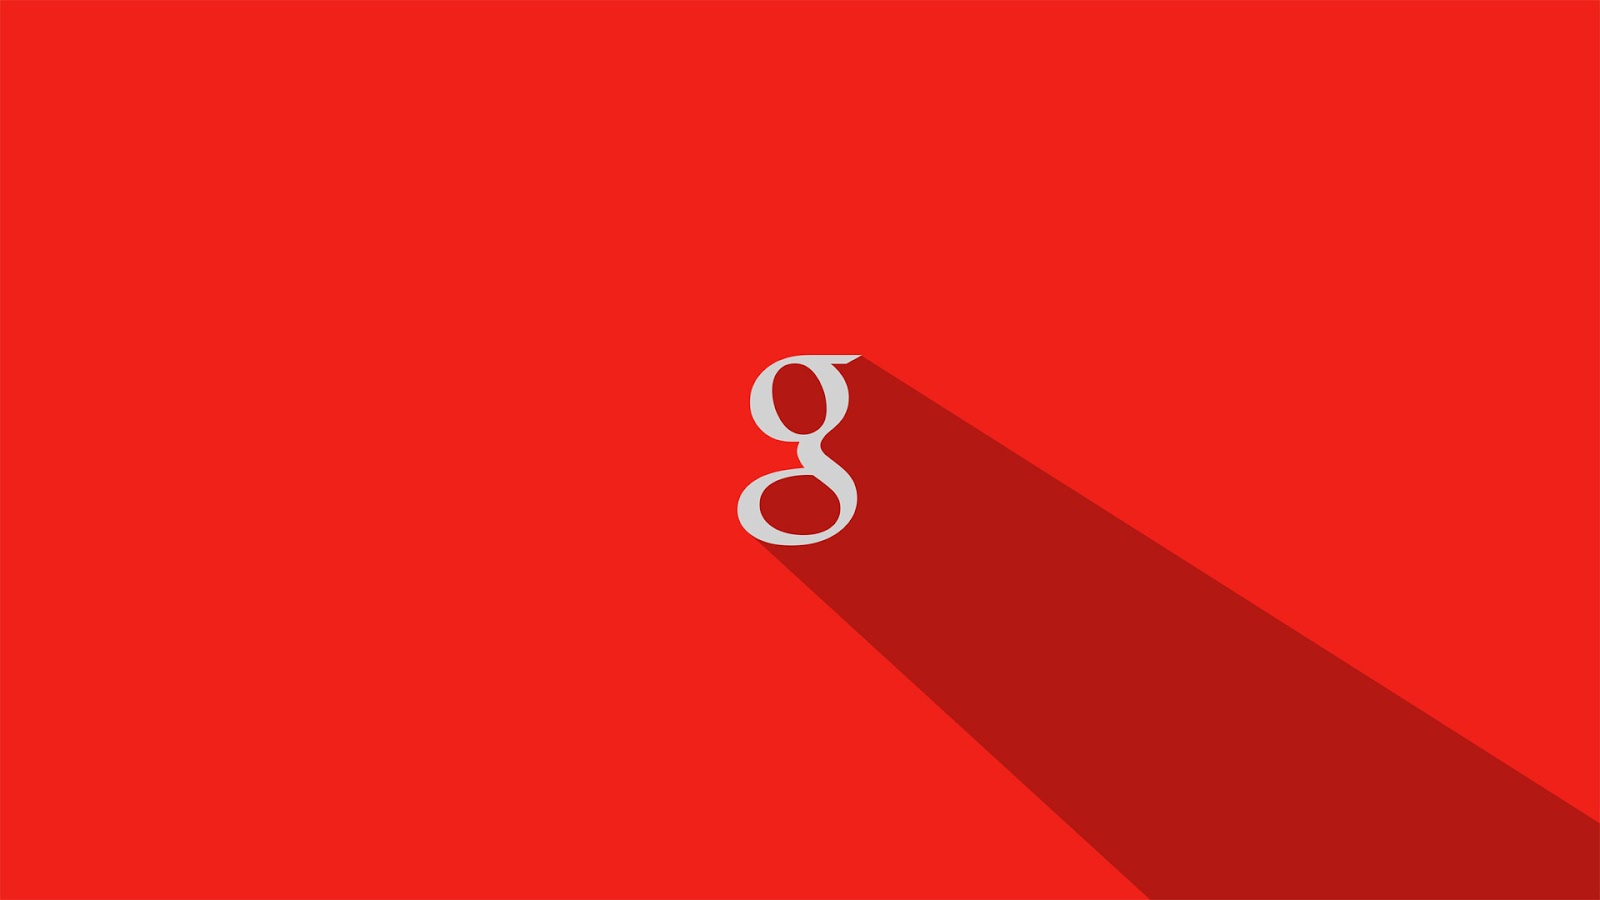 gmail wallpaper hd,red,font,text,line,graphic design